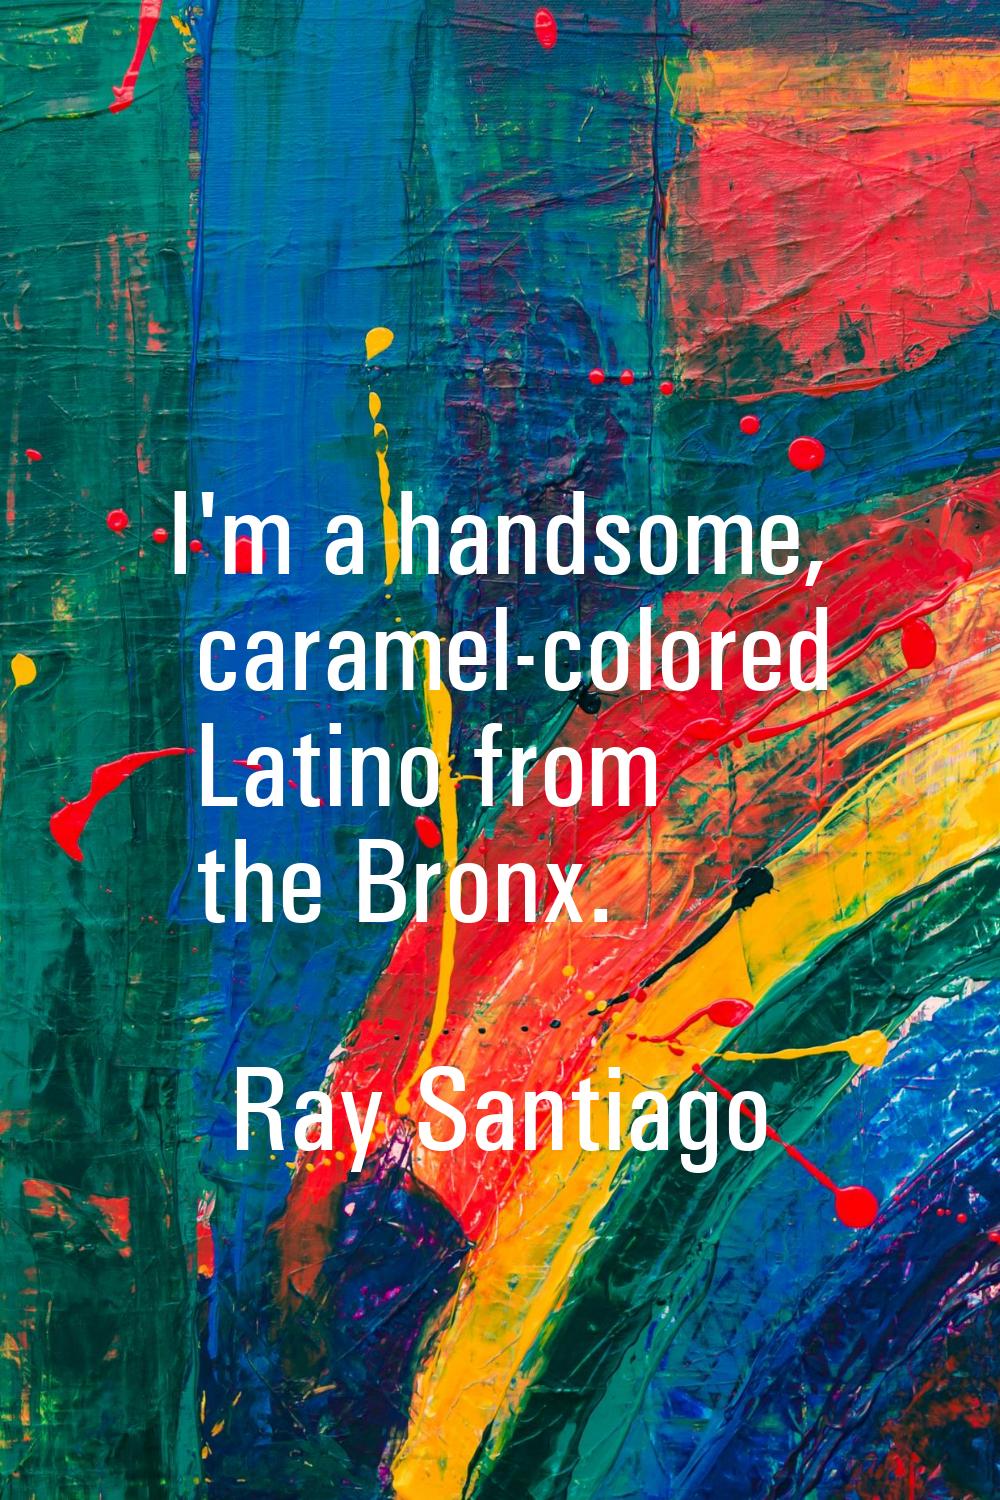 I'm a handsome, caramel-colored Latino from the Bronx.